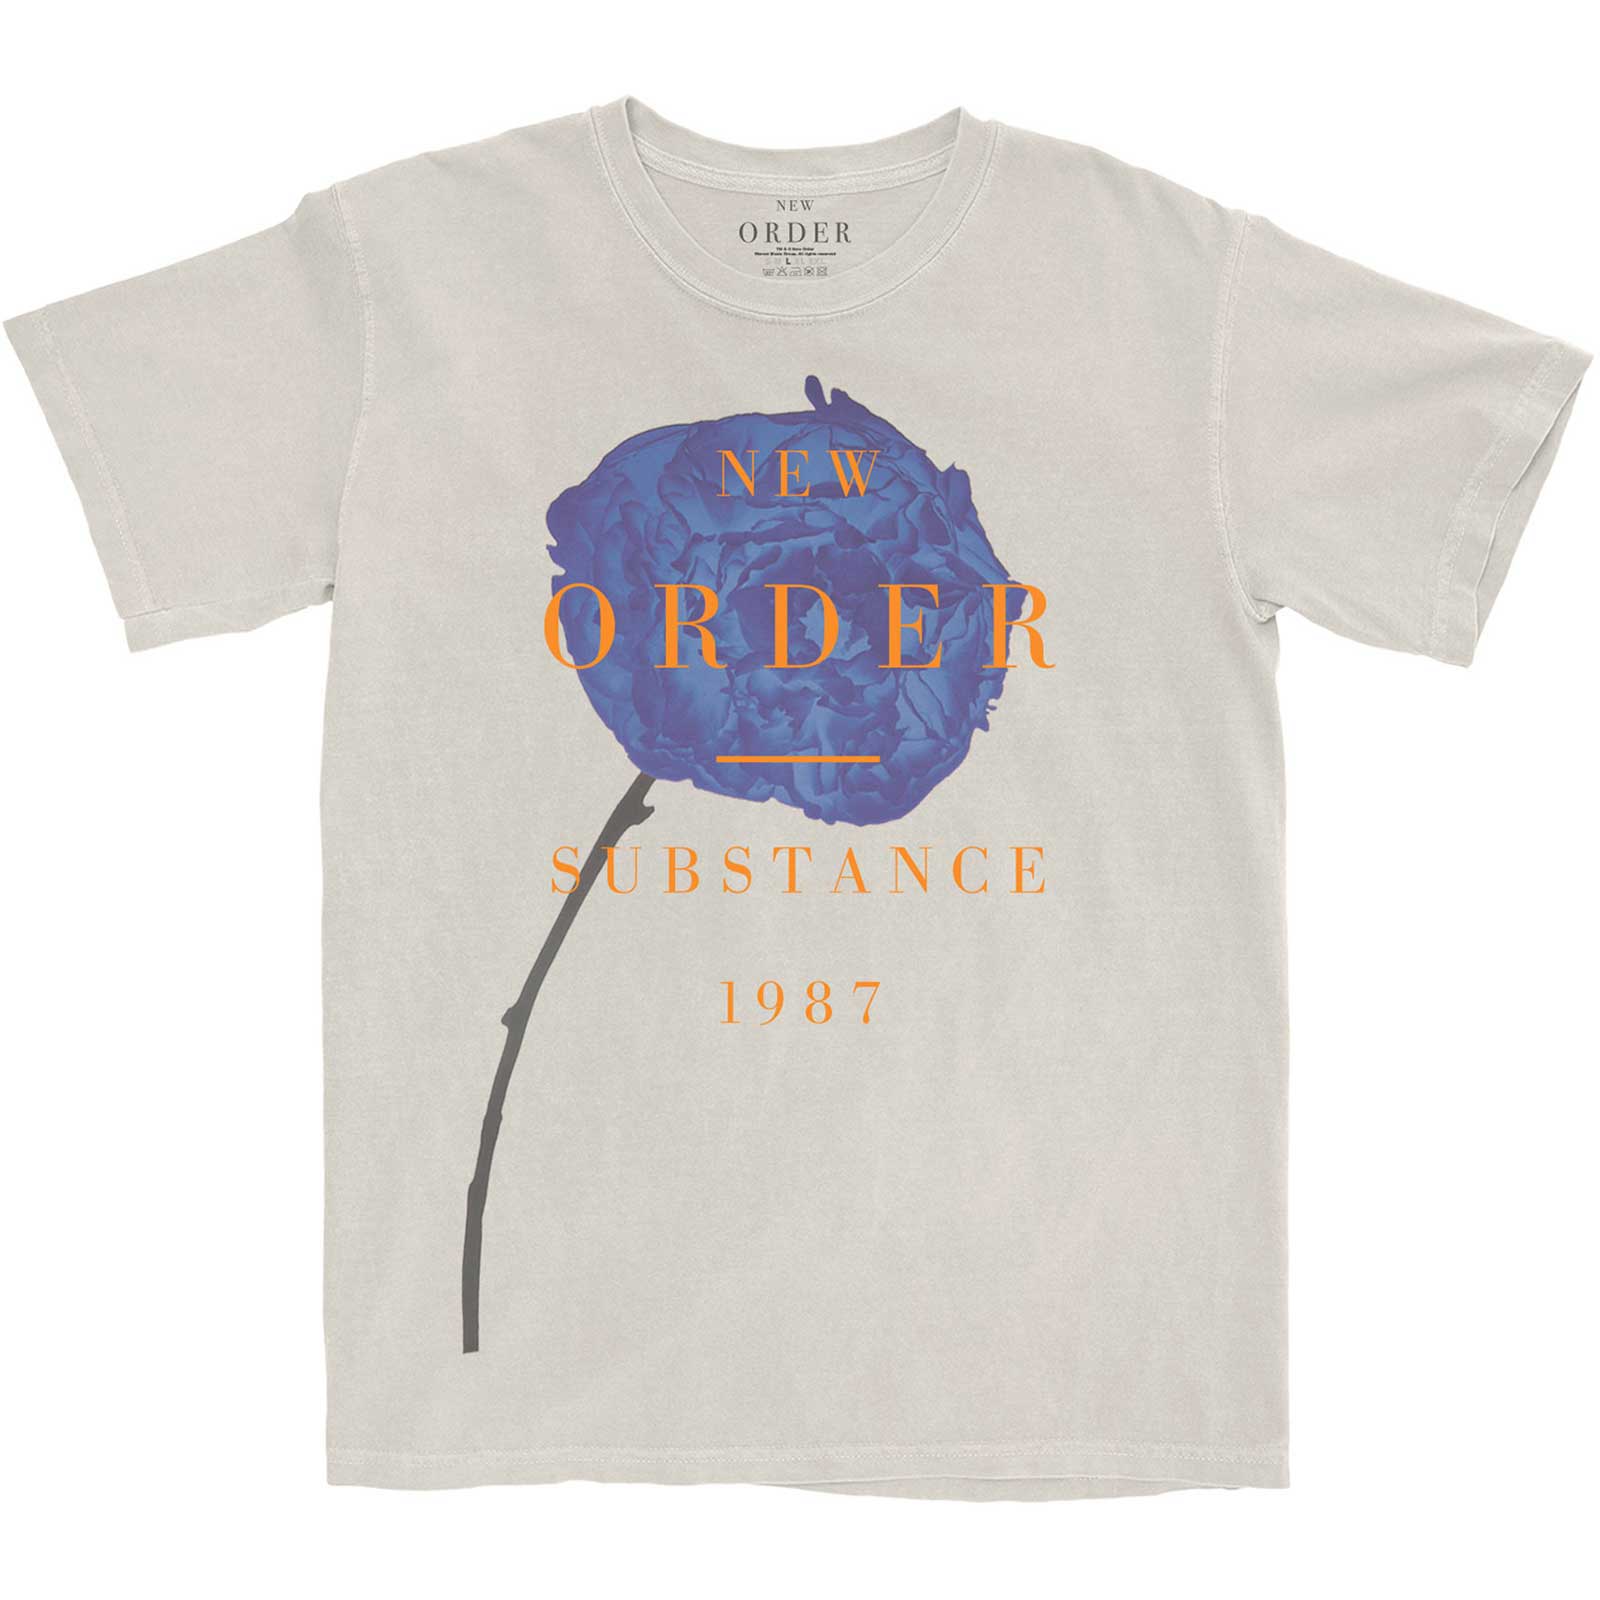 New Order Substance 1987 Tee